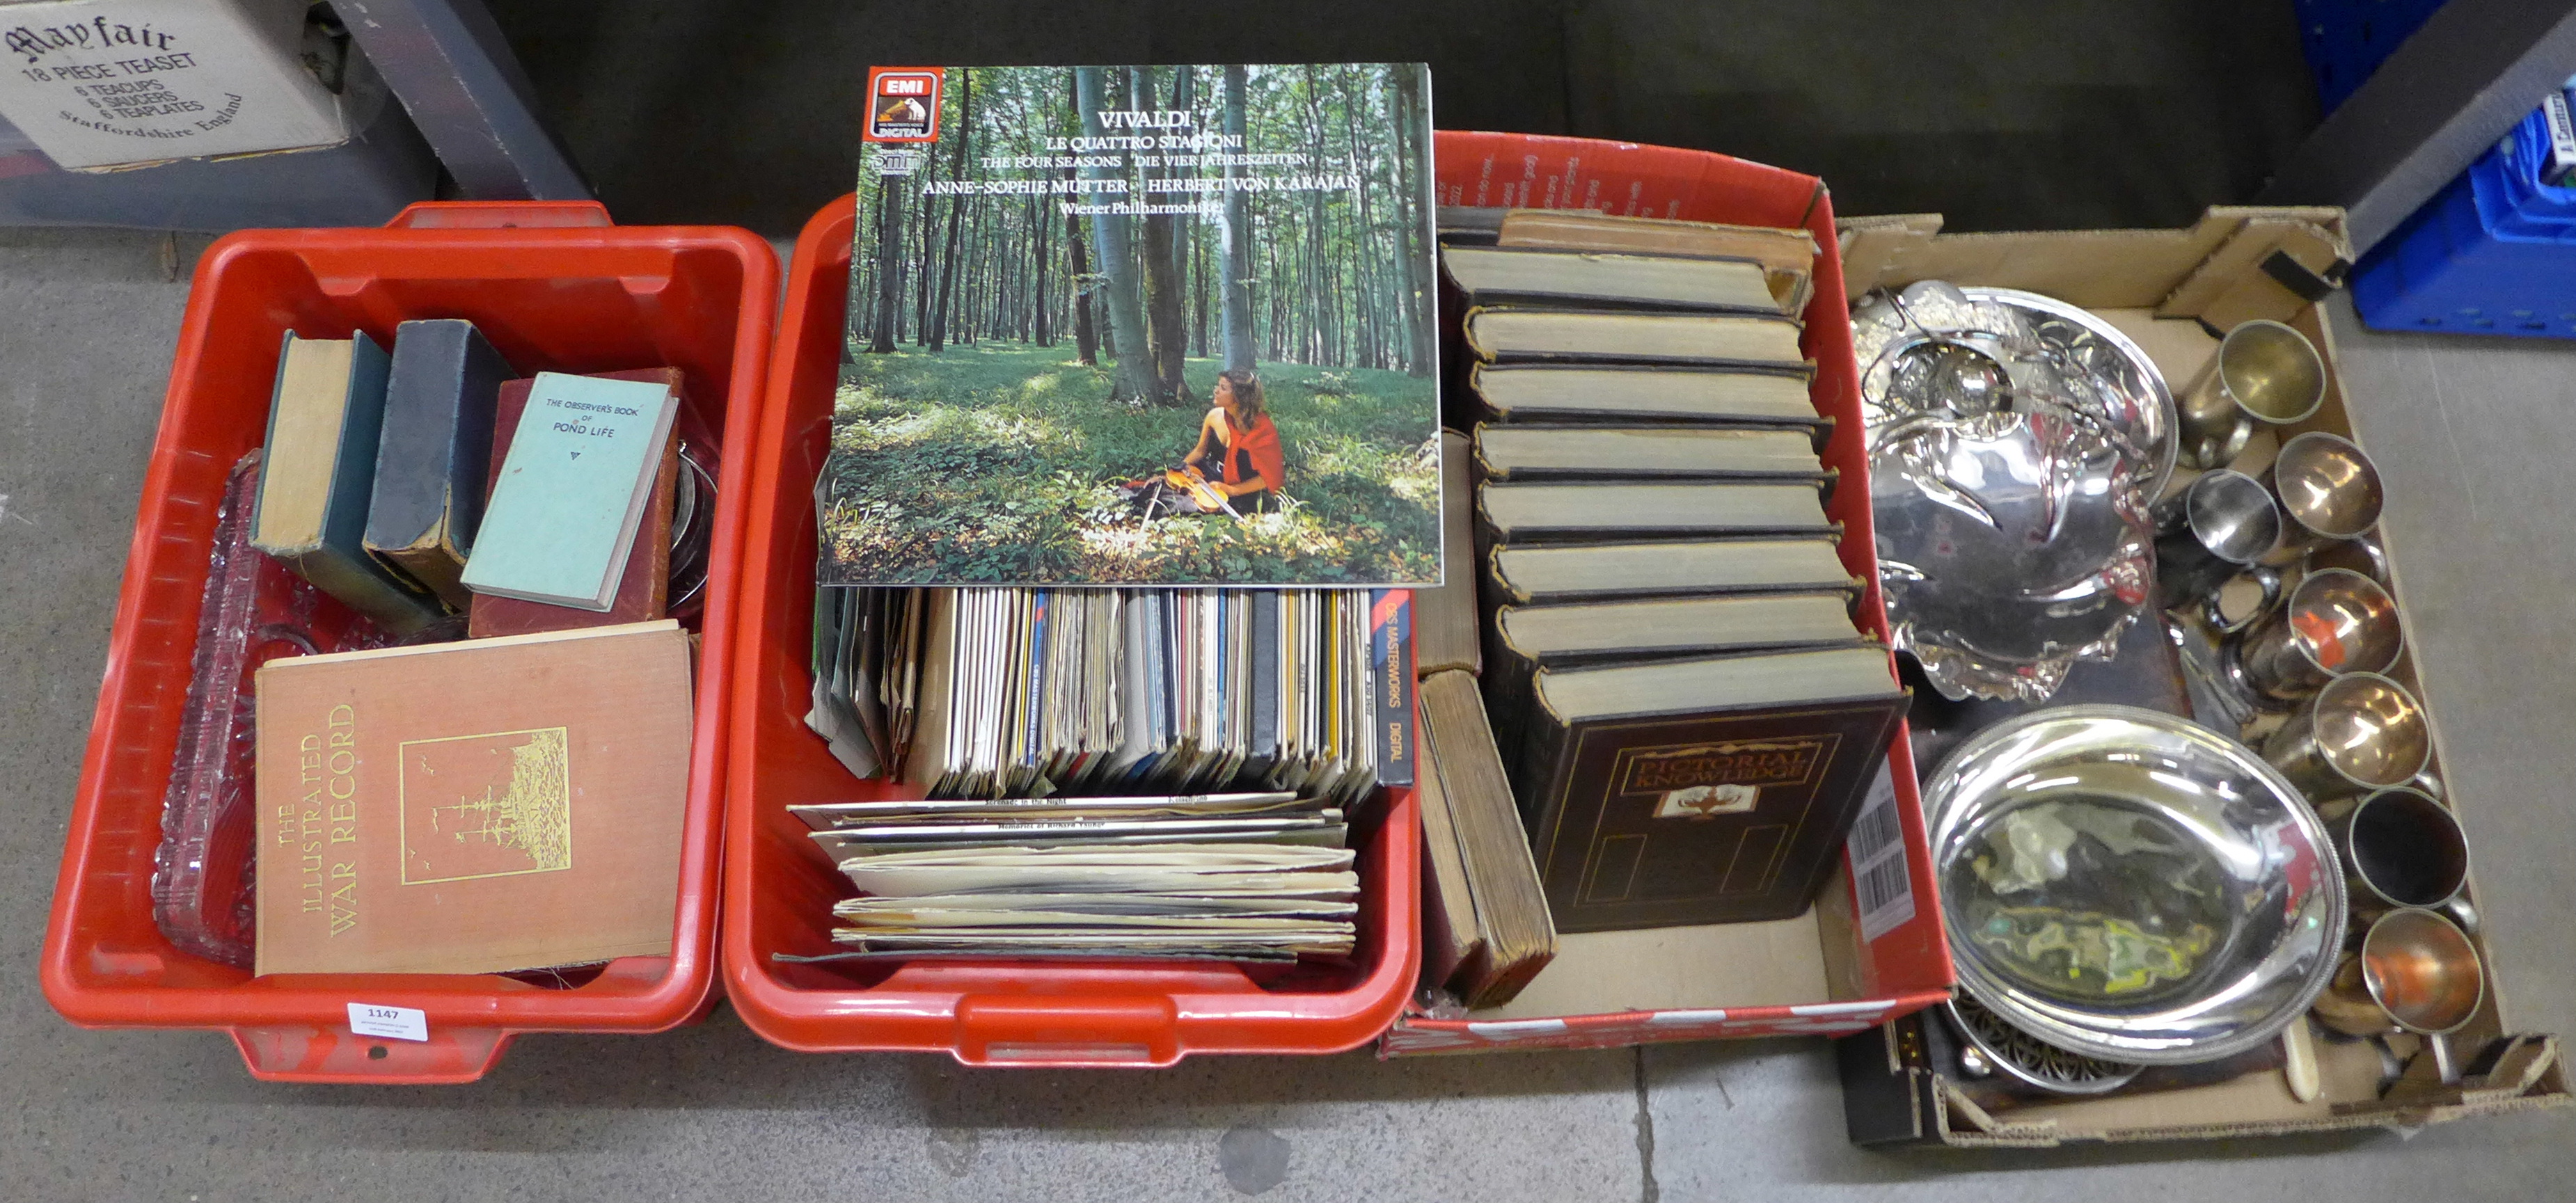 A box of silver plate, LP records and 7" singles and books, including Pictorial Knowledge and